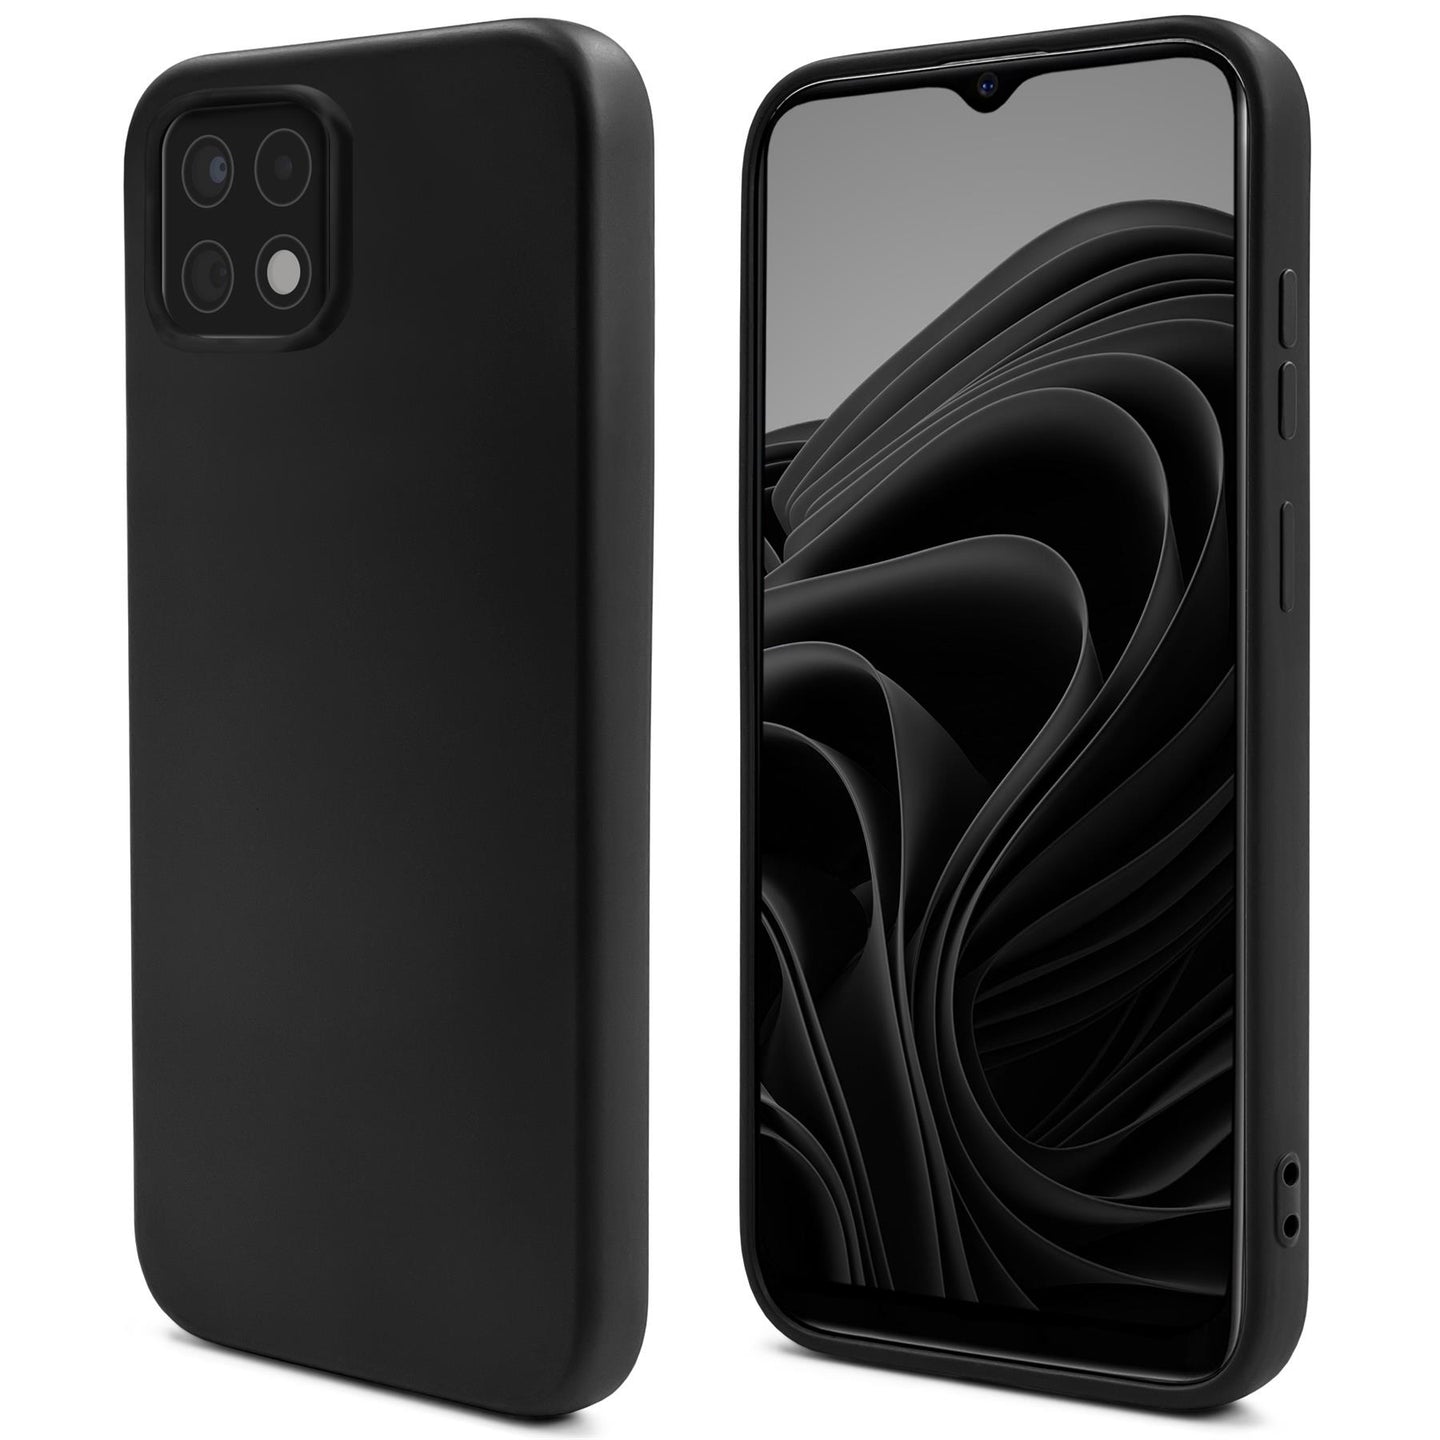 Moozy Lifestyle. Silicone Case for Samsung A22 5G, Black - Liquid Silicone Lightweight Cover with Matte Finish and Soft Microfiber Lining, Premium Silicone Case